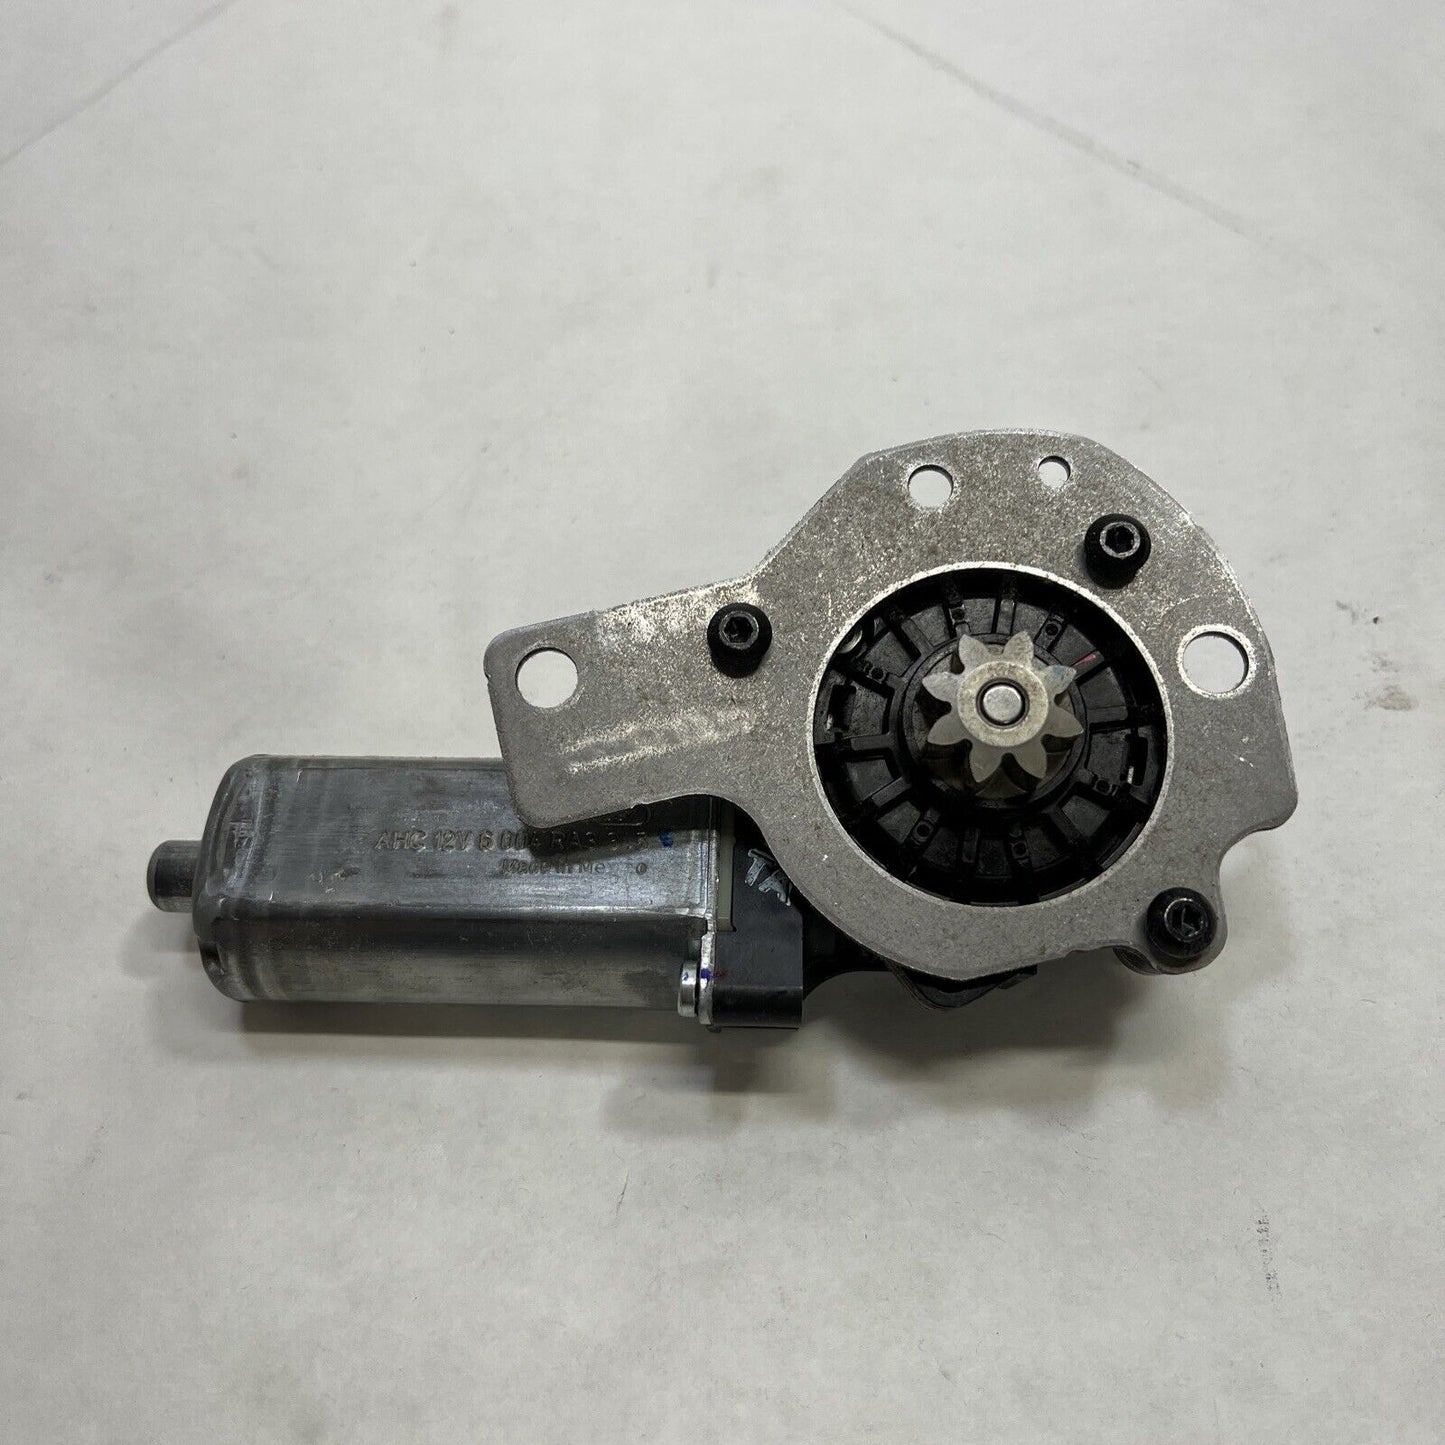 New OEM GM Chevy Traverse Enclave Actuator Motor 13523873